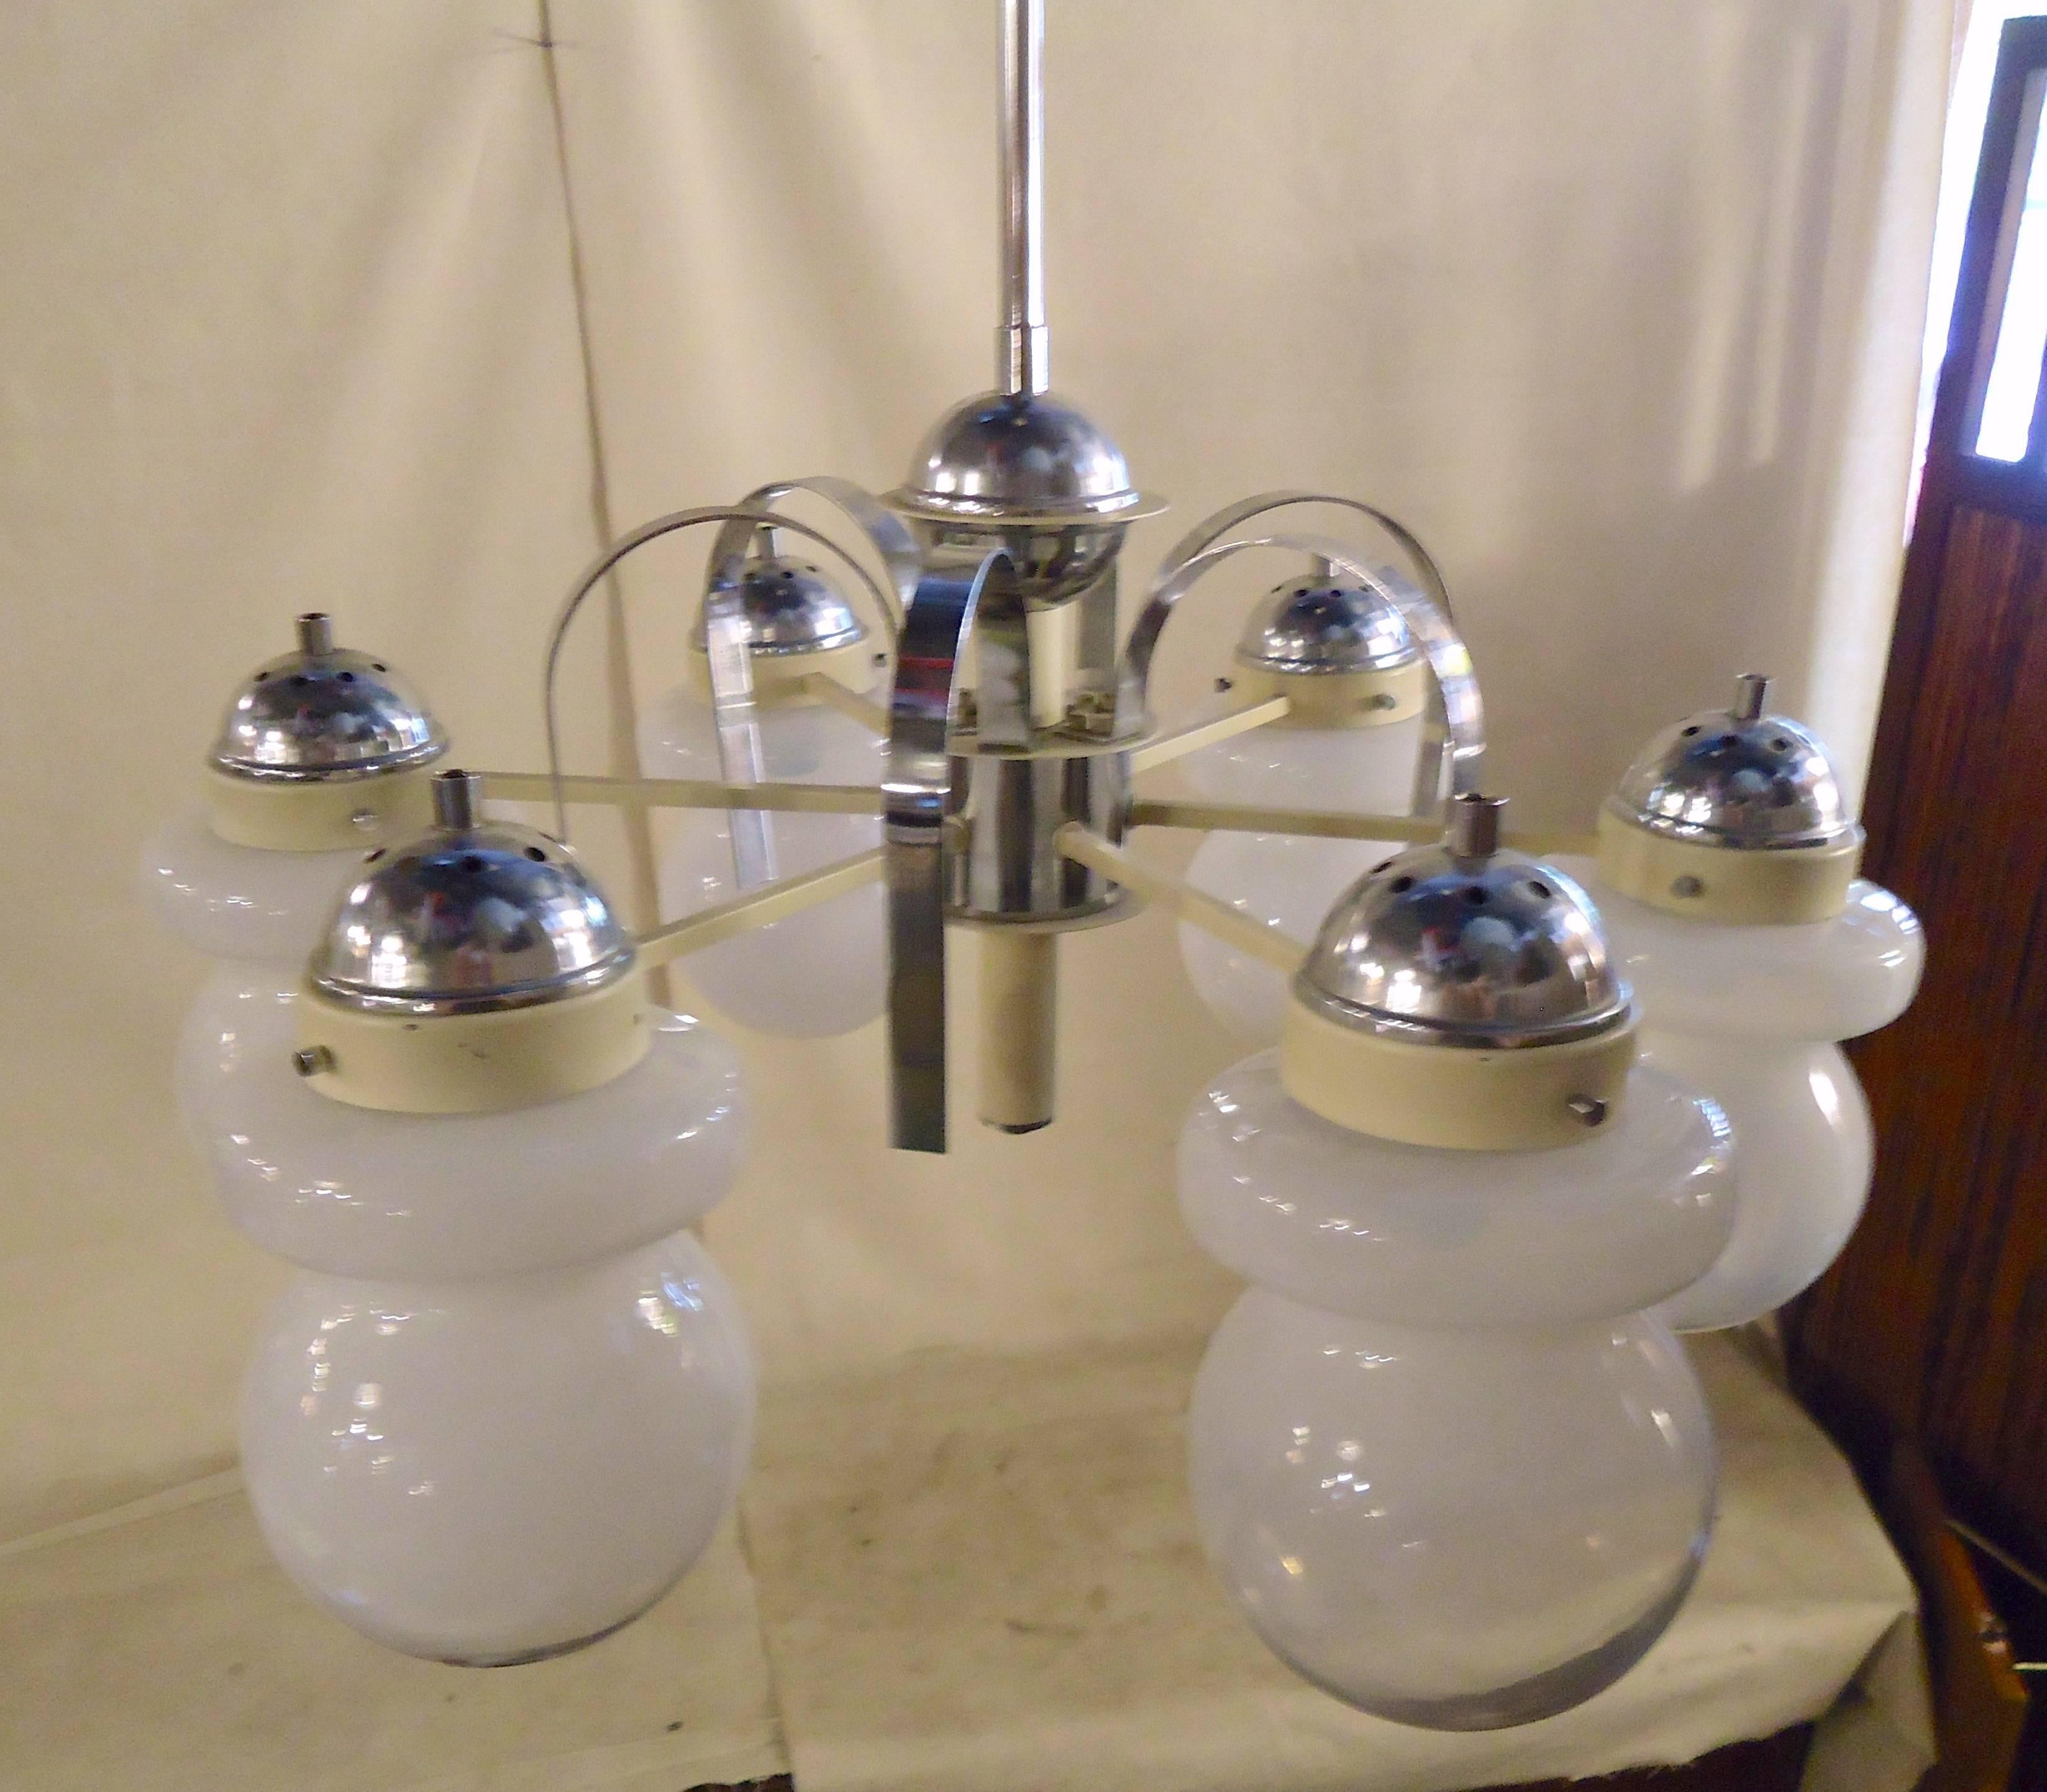 Chrome frame chandelier with six glass globes. Long stem, chrome decorative bands, white frosted globes.

(Please confirm item location - NY or NJ - with dealer).
 